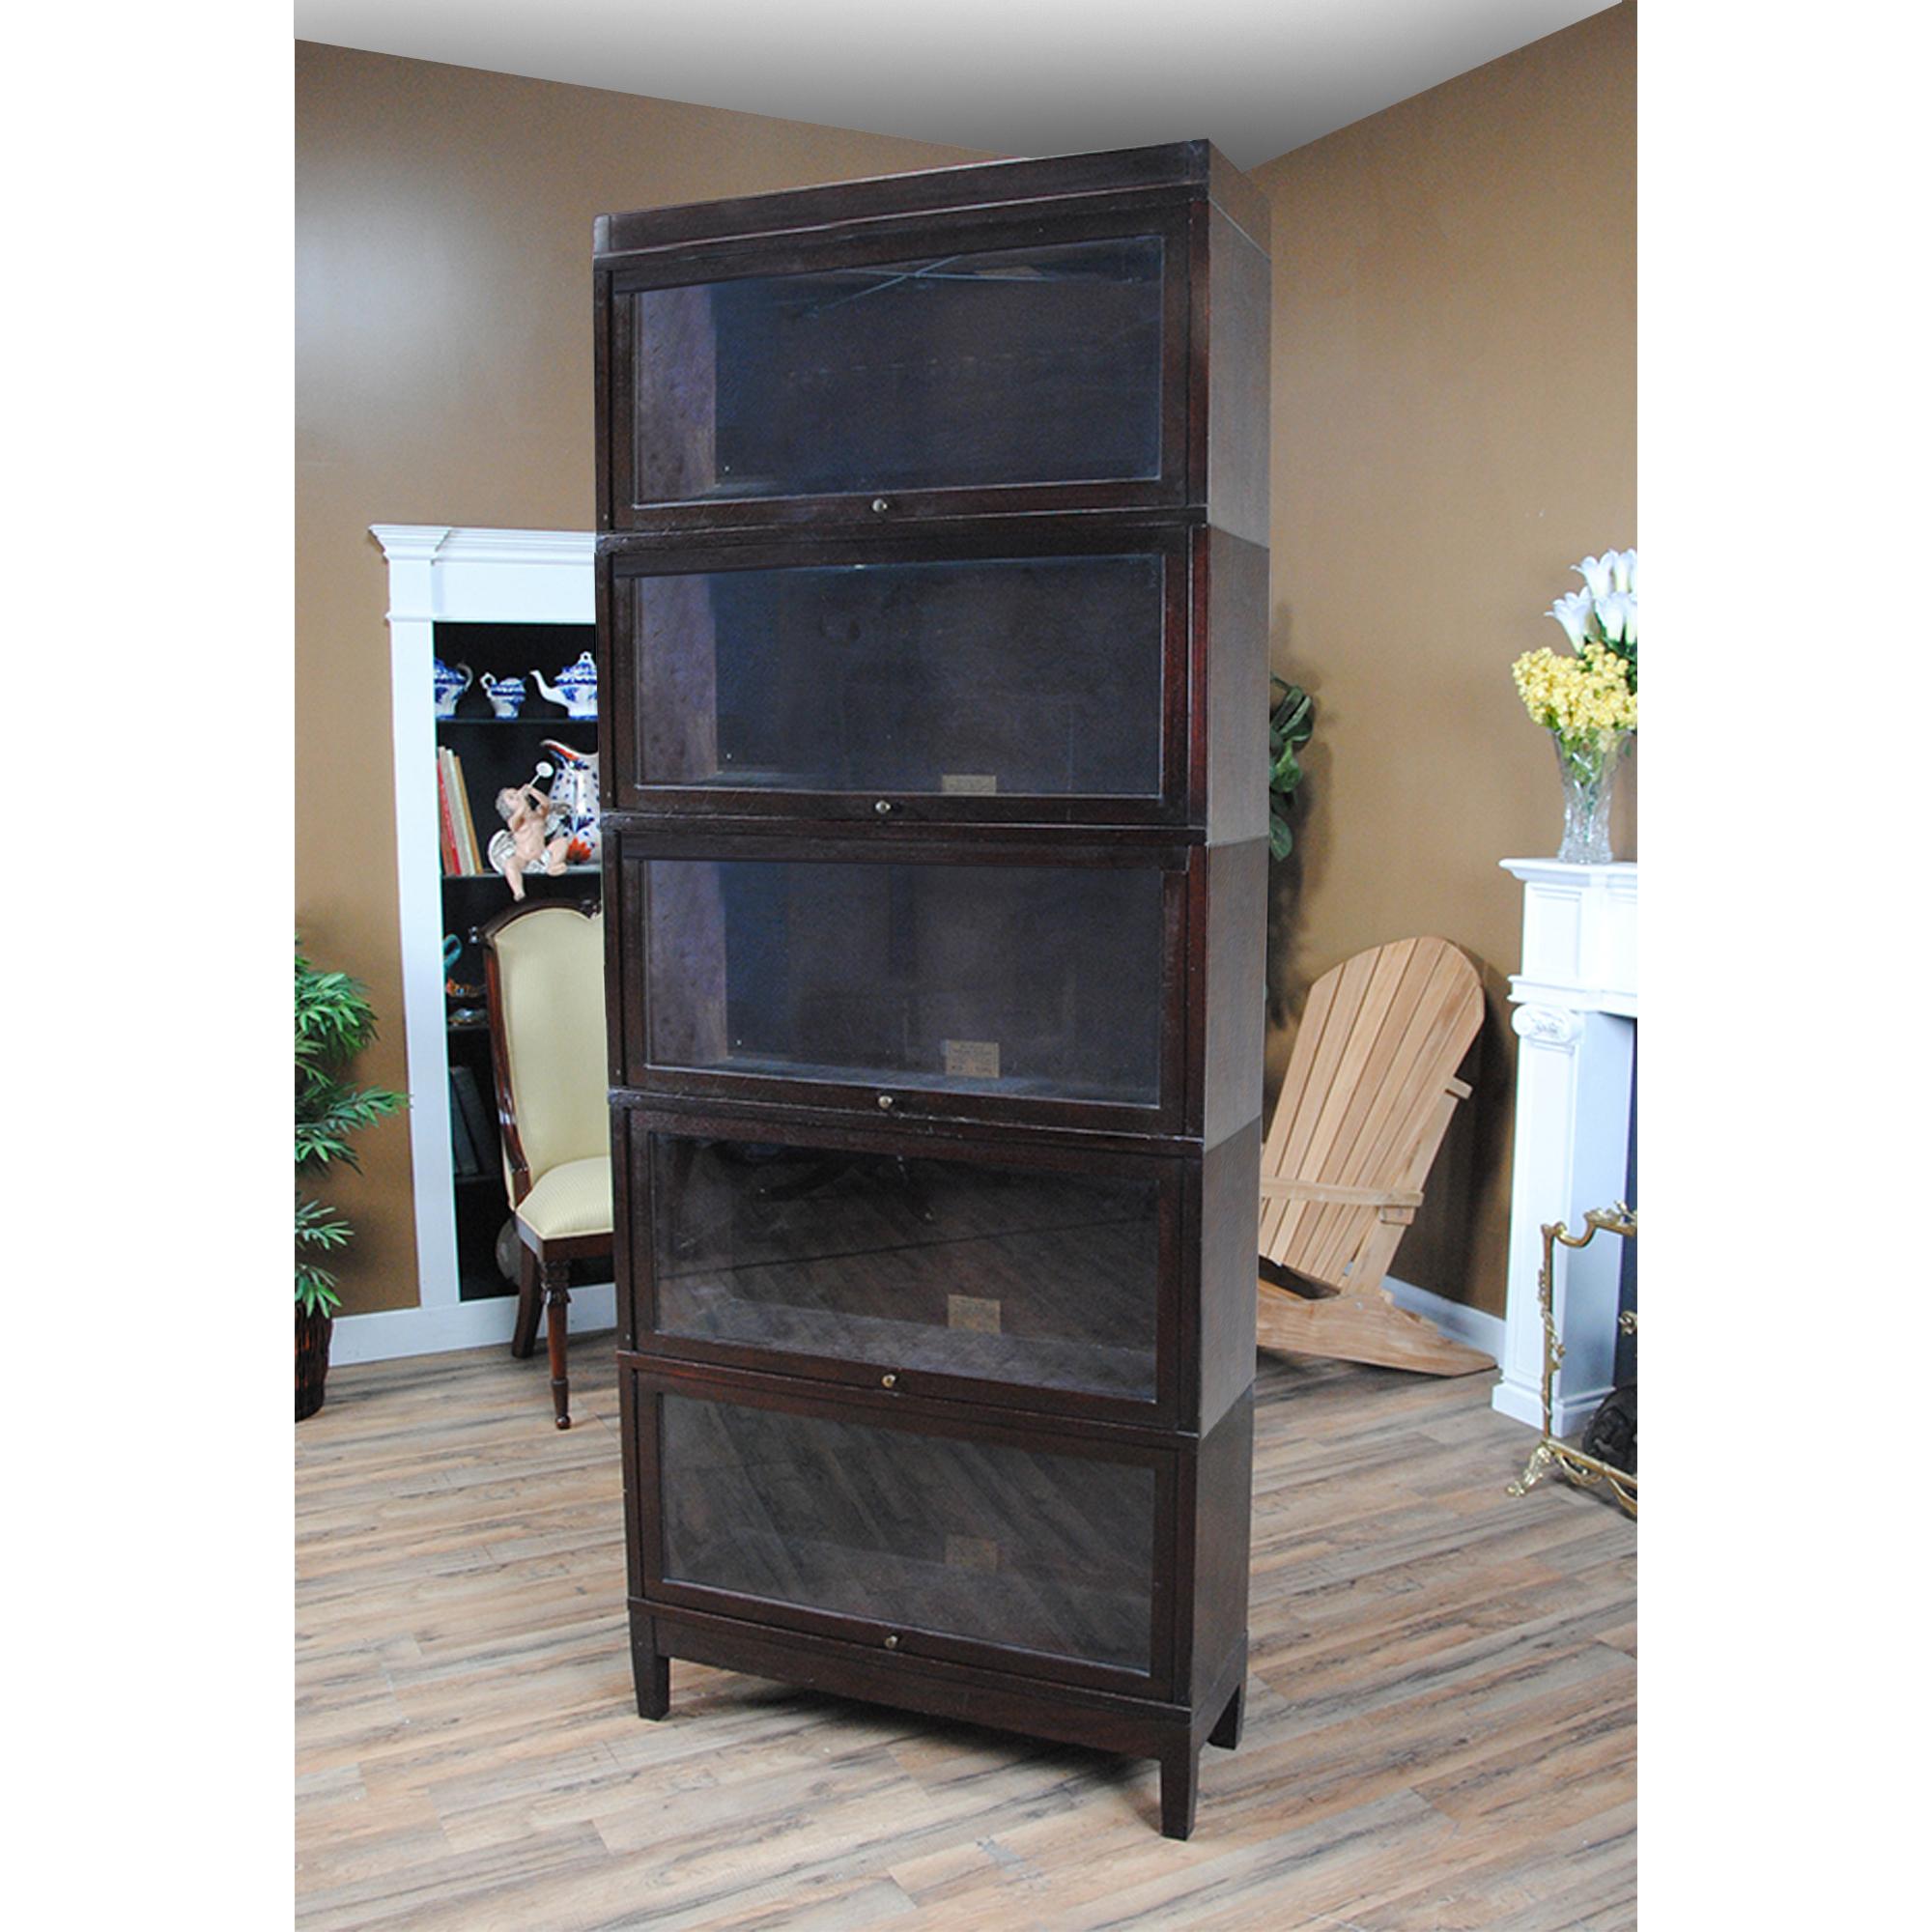 A Vintage mahogany globe Wernicke bookcase – the perfect addition to any home or office space! Crafted from high-quality mahogany wood, this bookcase is about 100 years old but still exudes the same elegance and sophistication as when it was first